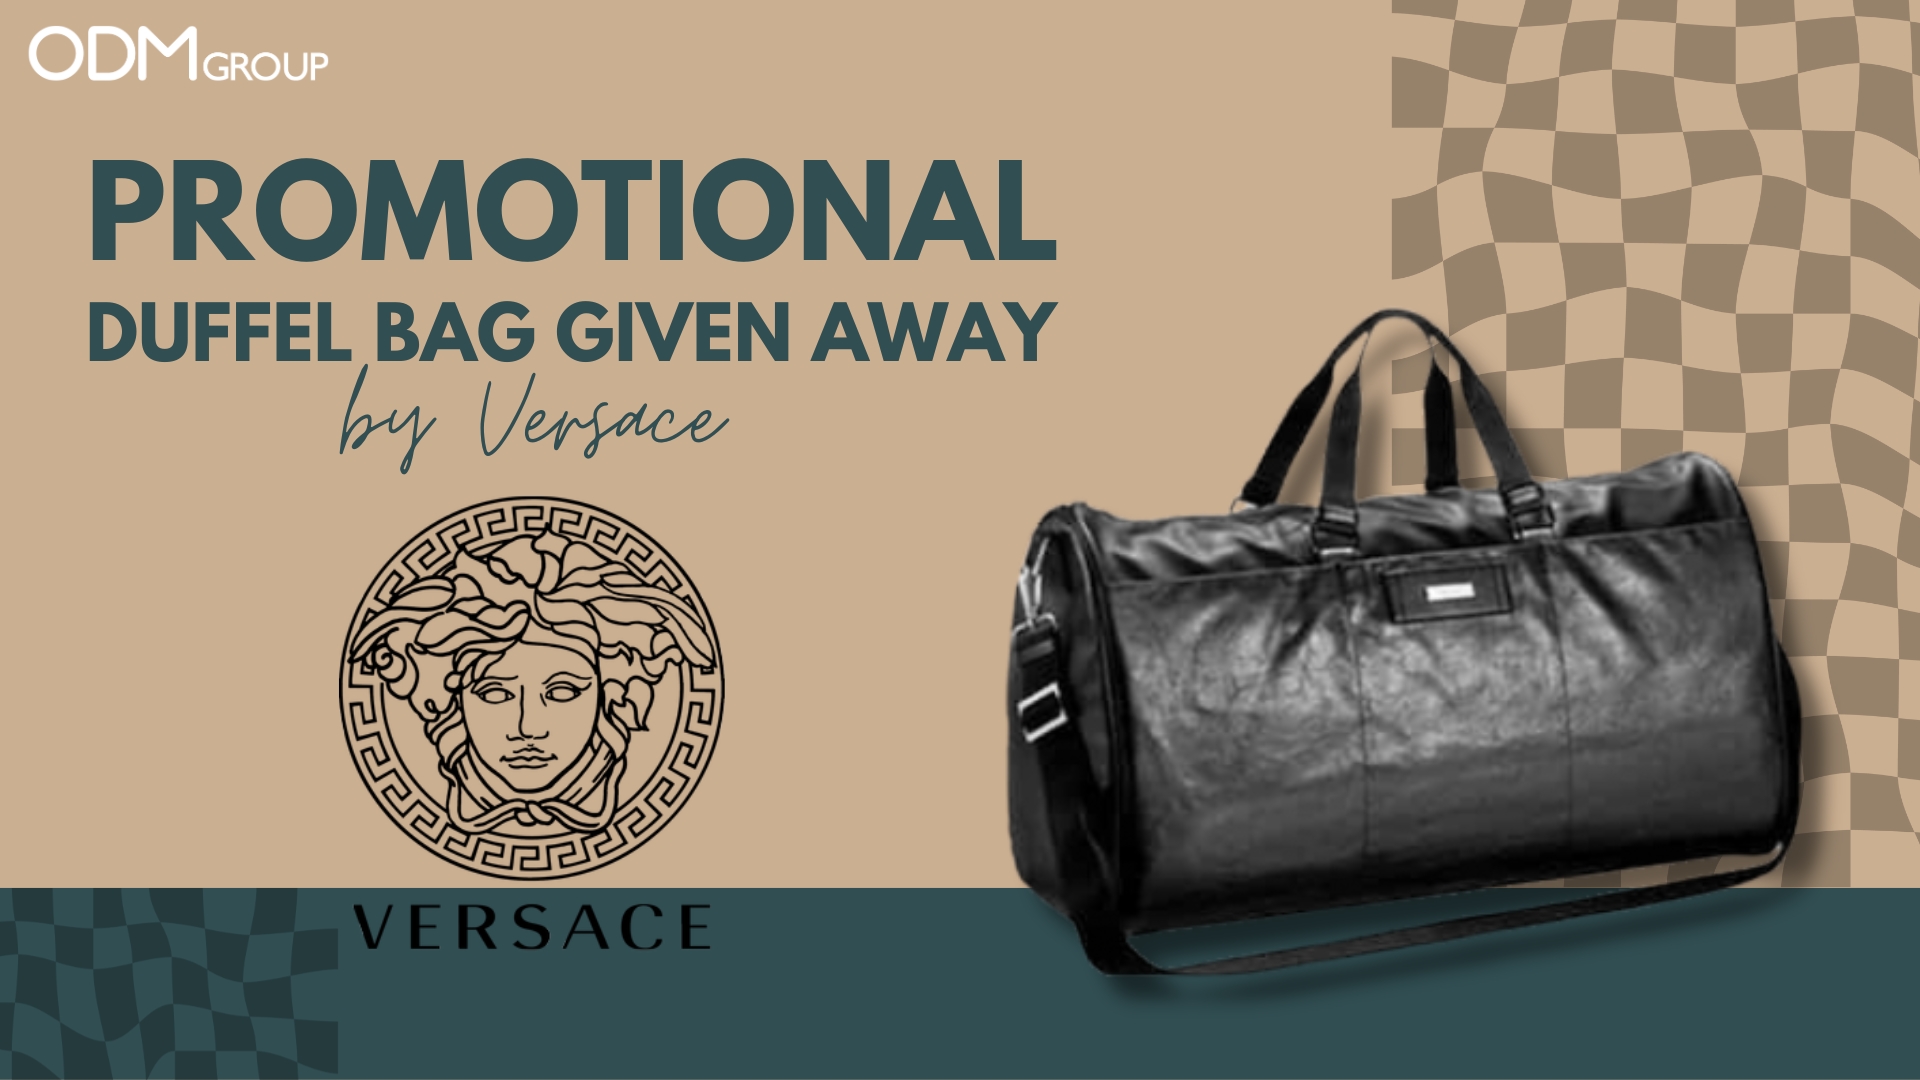 Promotional Duffel Bag Given Away by Versace